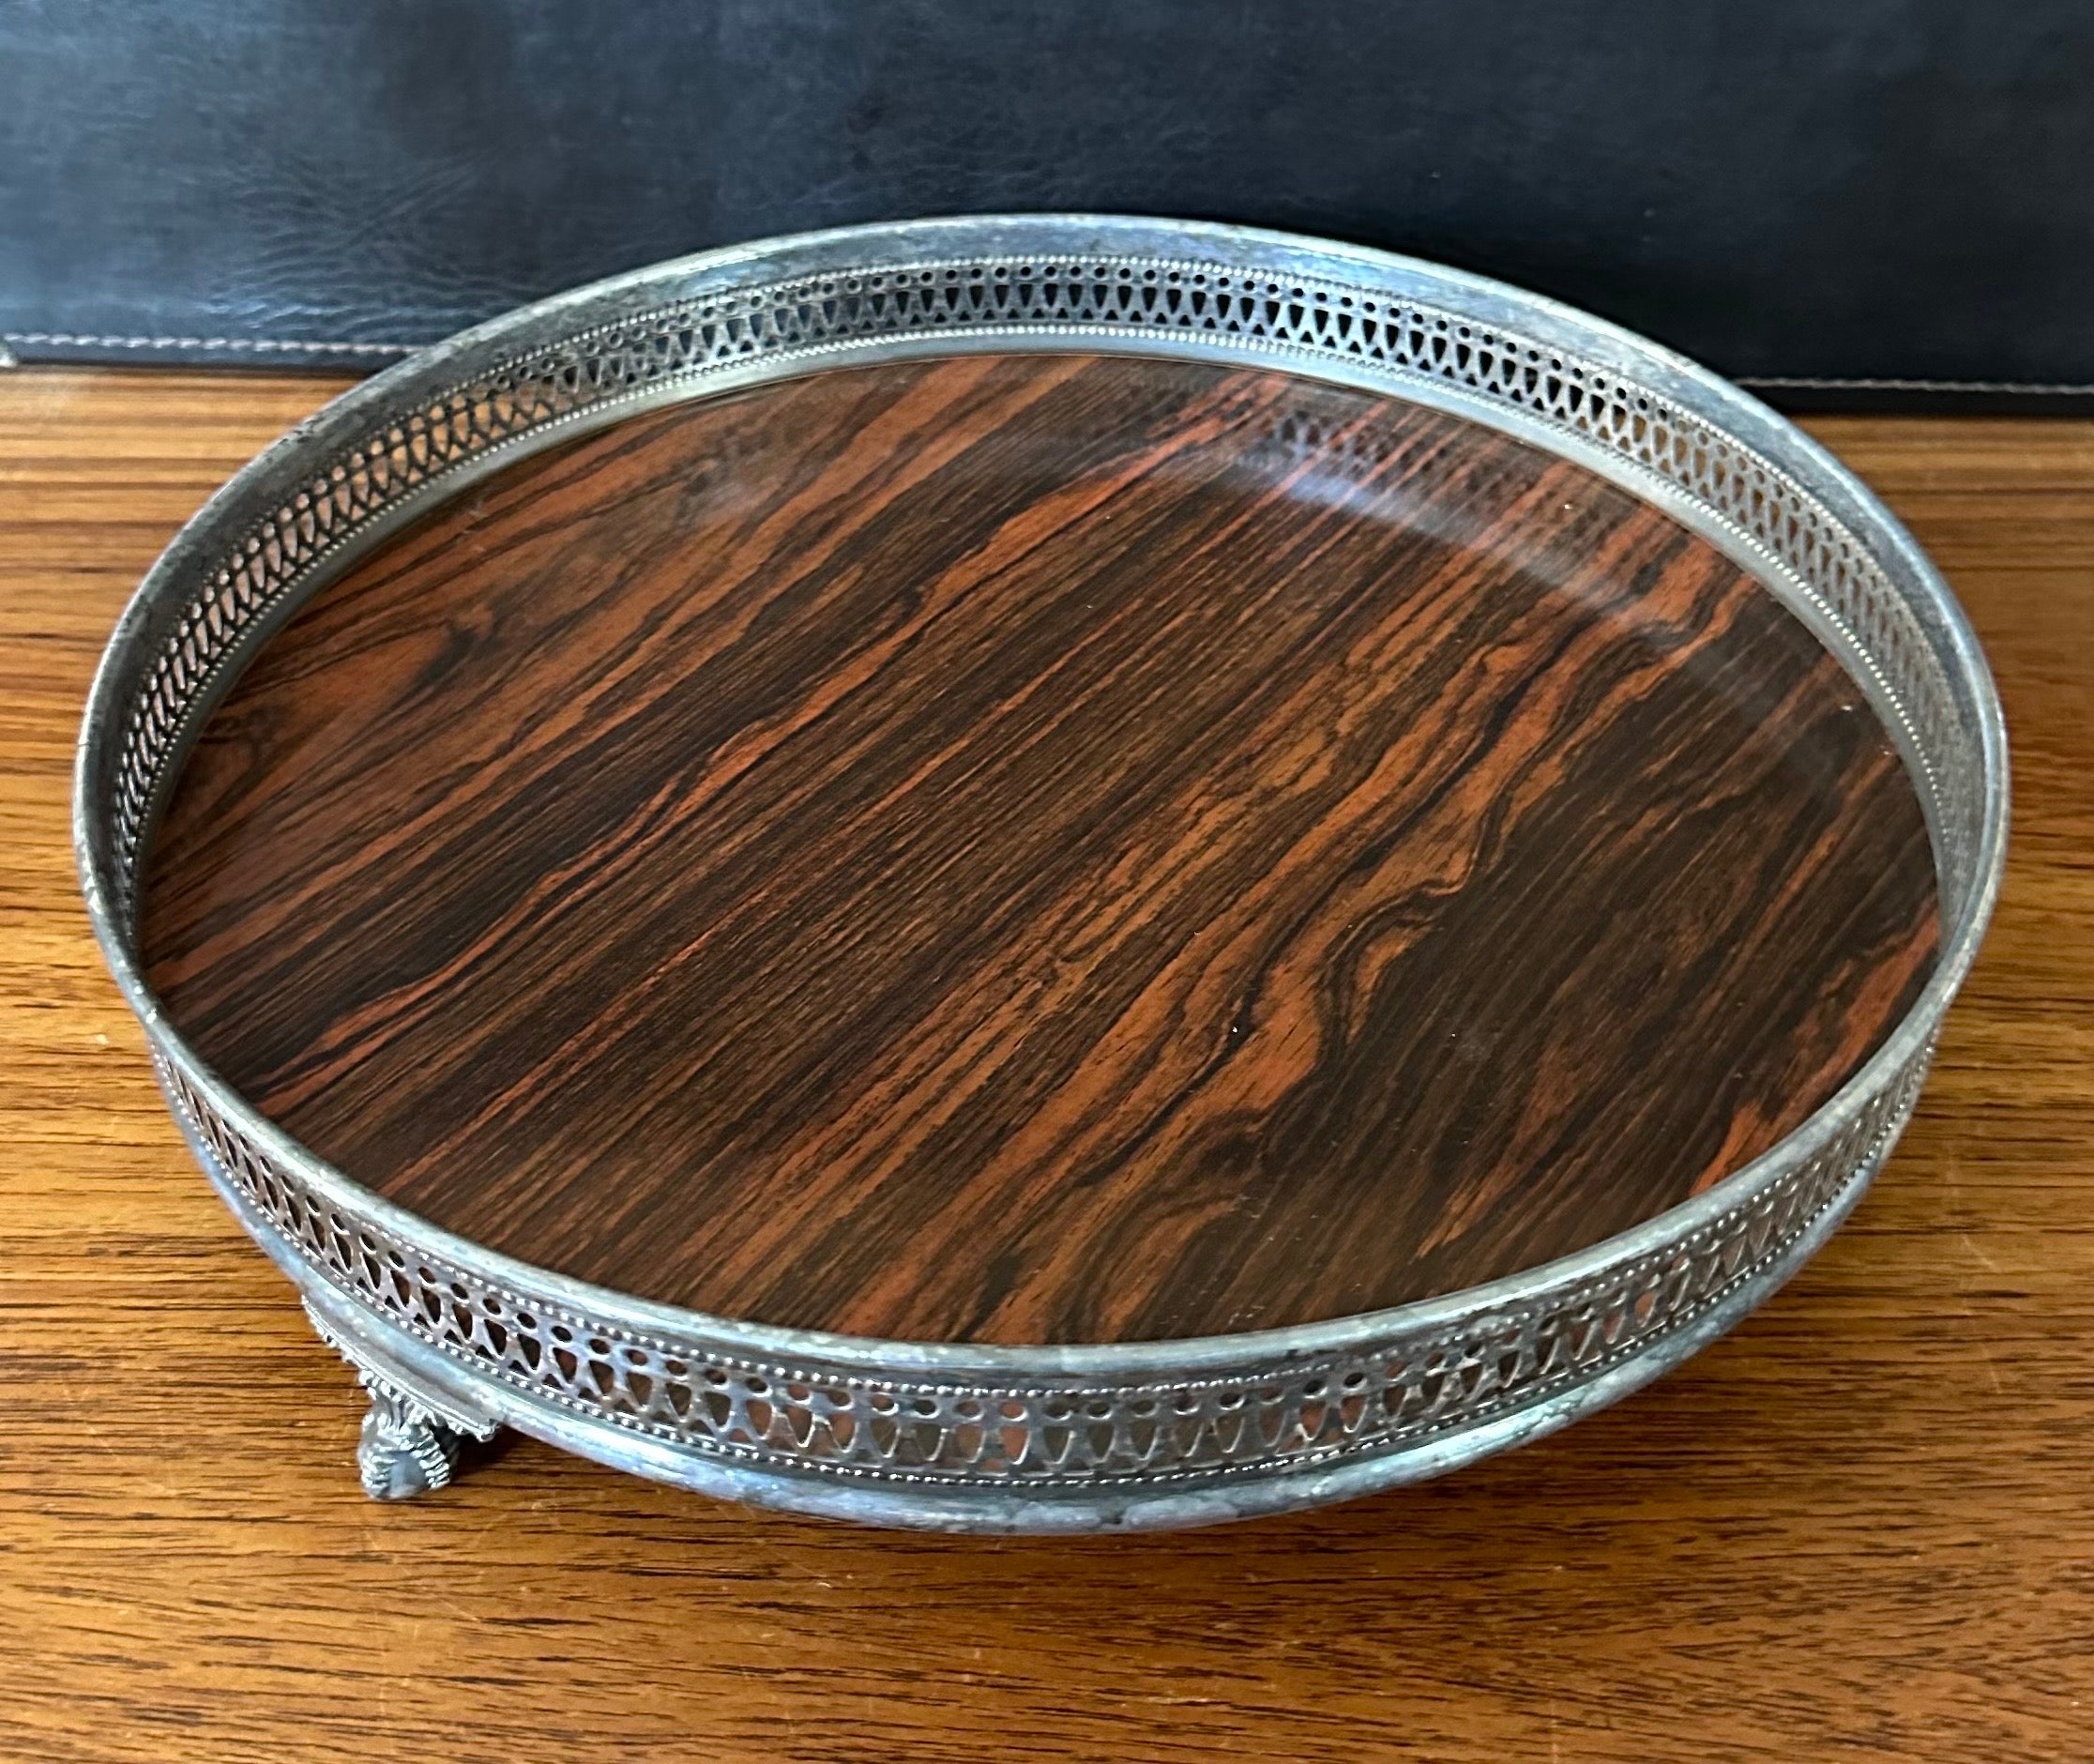 A nice mid-century rosewood Formica footed serving tray with silver plate edge by Sheffield Silver Co., circa 1970s. The tray is in good vintage condition and measures 12.5